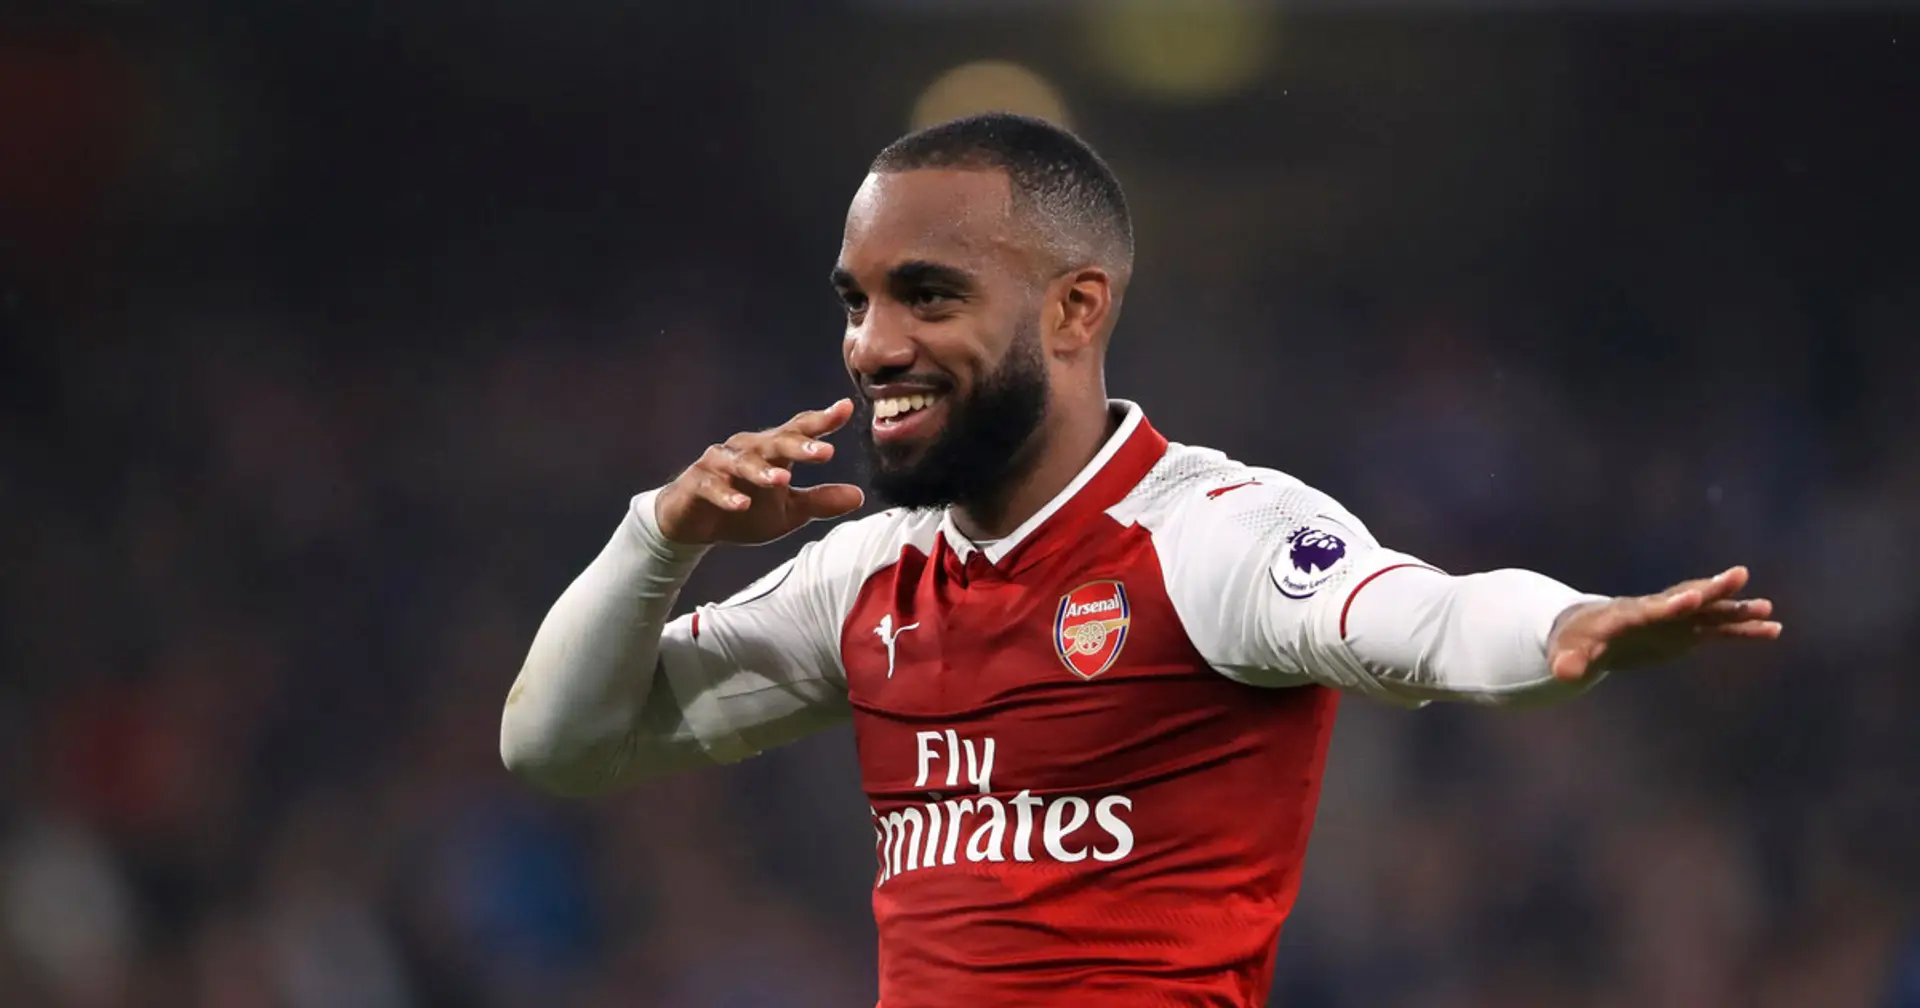 Joyeux anniversaire Laca: our French striker turns 29 today!